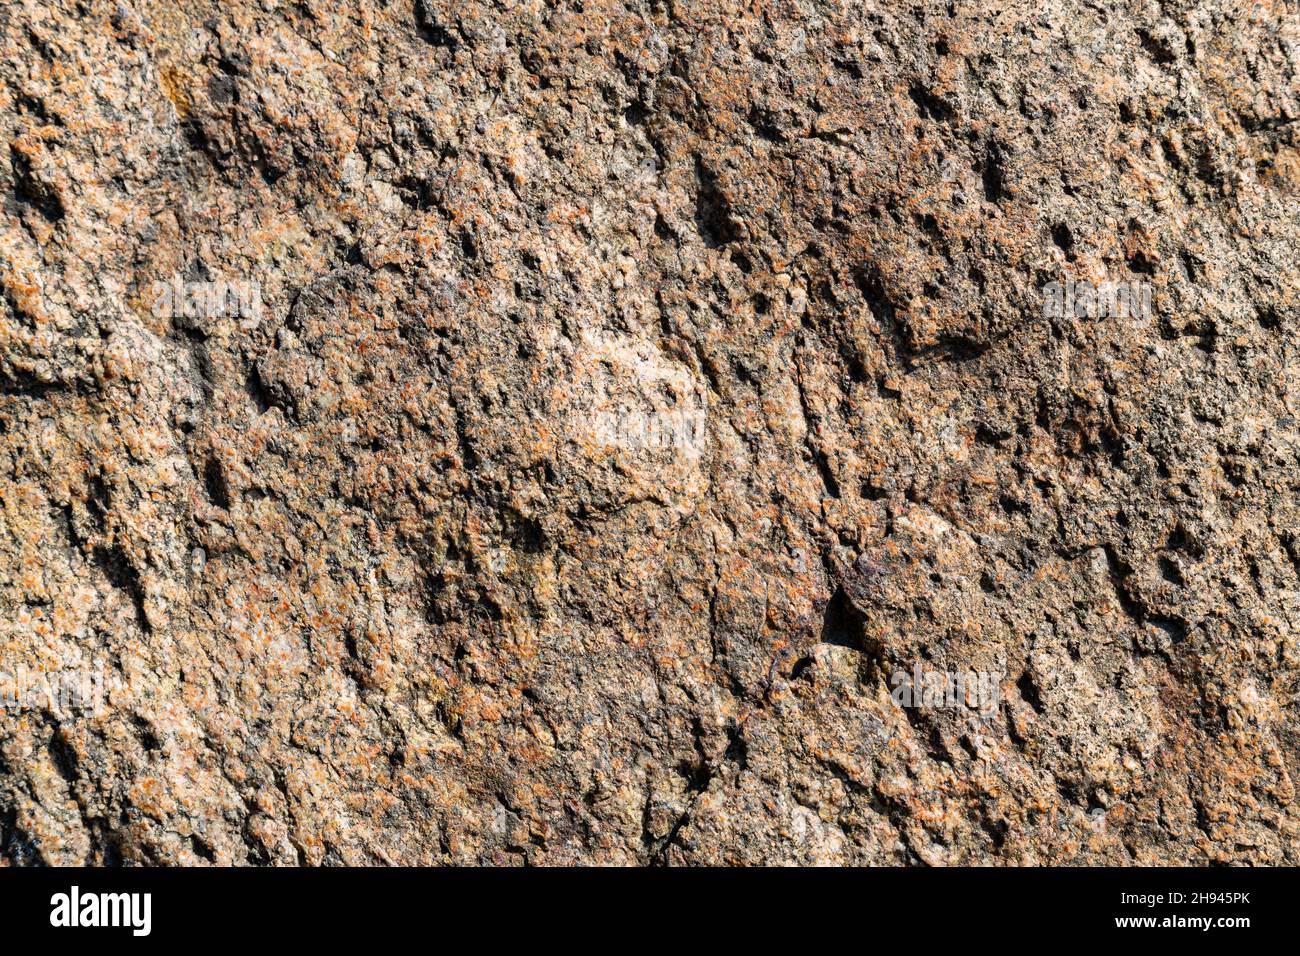 Granite texture. Natural rock texture. Abstract stone background. Earth colors Stock Photo